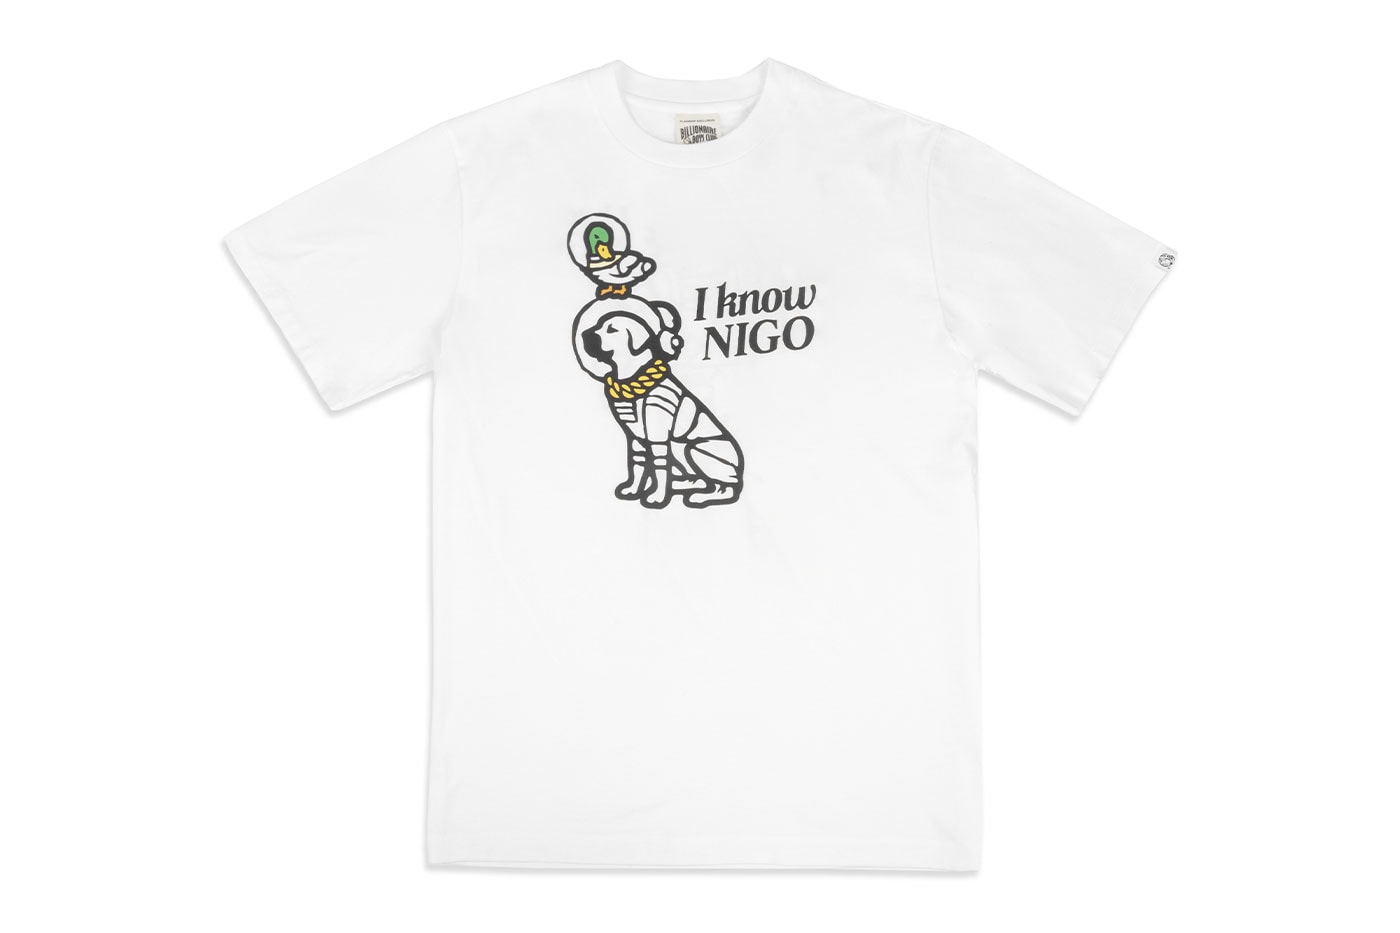 Human Made Billionaire Boys Club Team Up for I Know NIGO dog duck astronaut Capsule collection release info